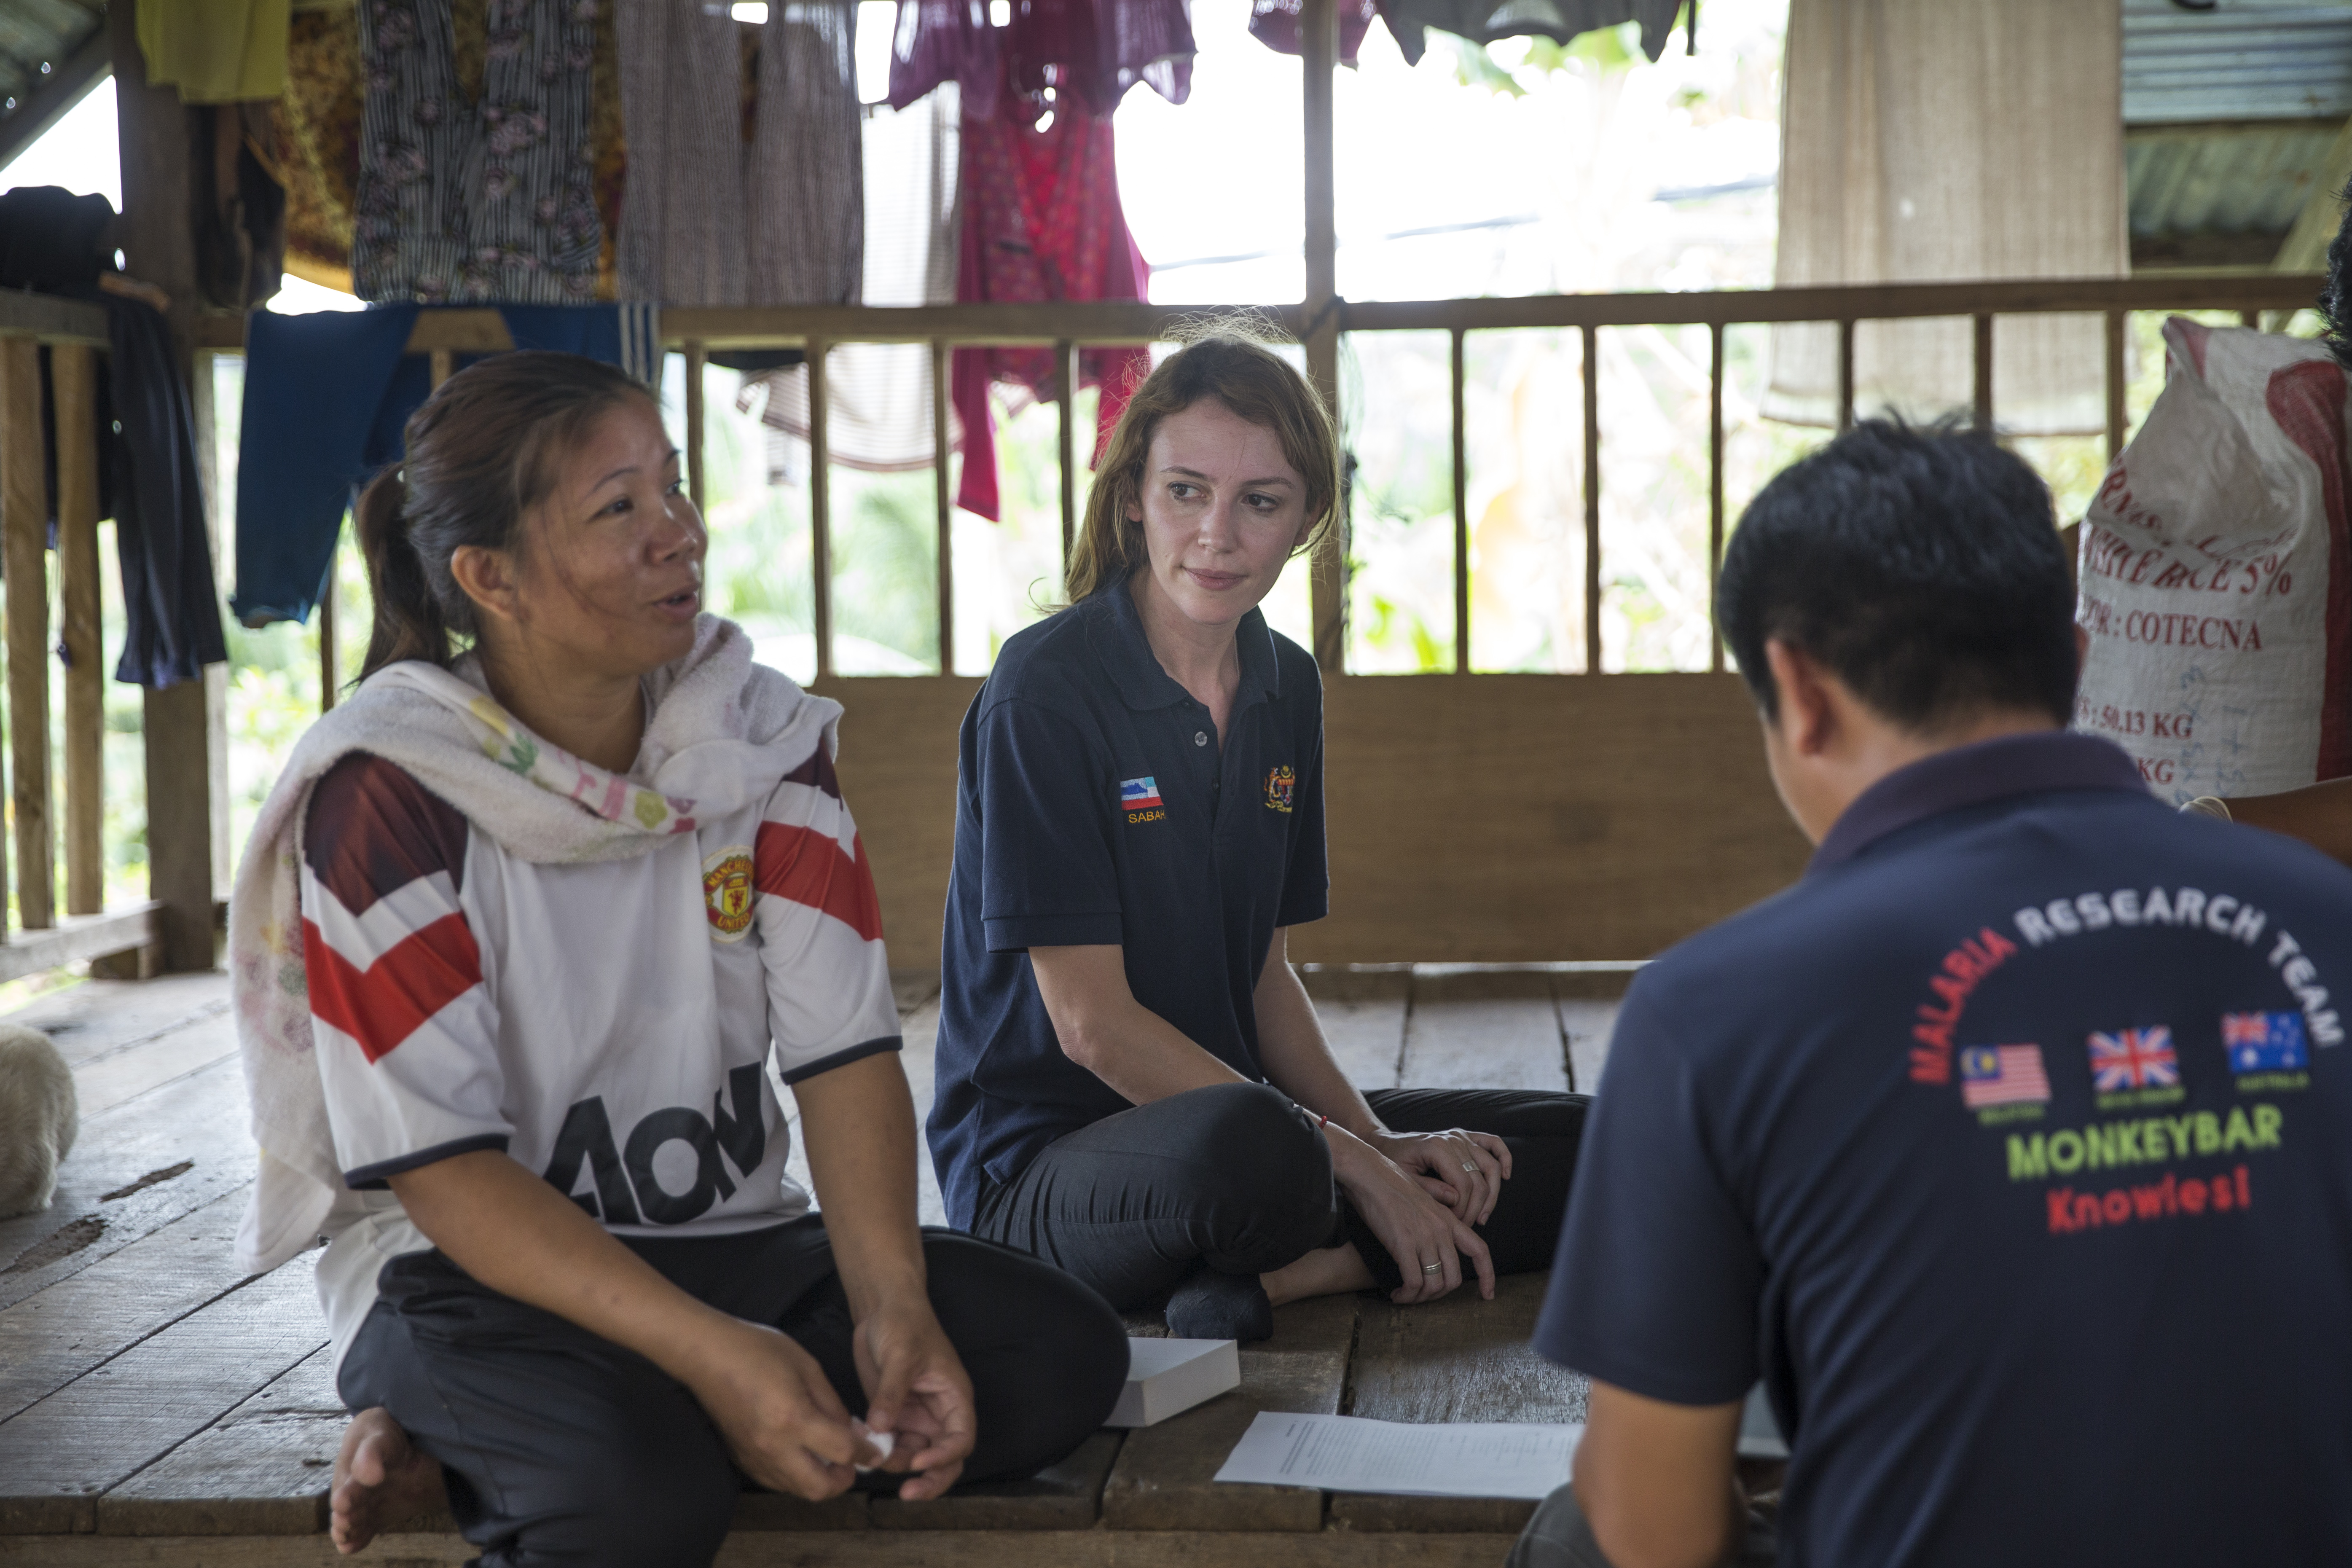 Kimberly Fornace, center, a LSHTM research fellow listens to local woman, left, living in a longhouse during blood sampling and interview in Kota Marudu, Sabah, Malaysia, Friday, March 17, 2017. (Joshua Paul for LSHTM)